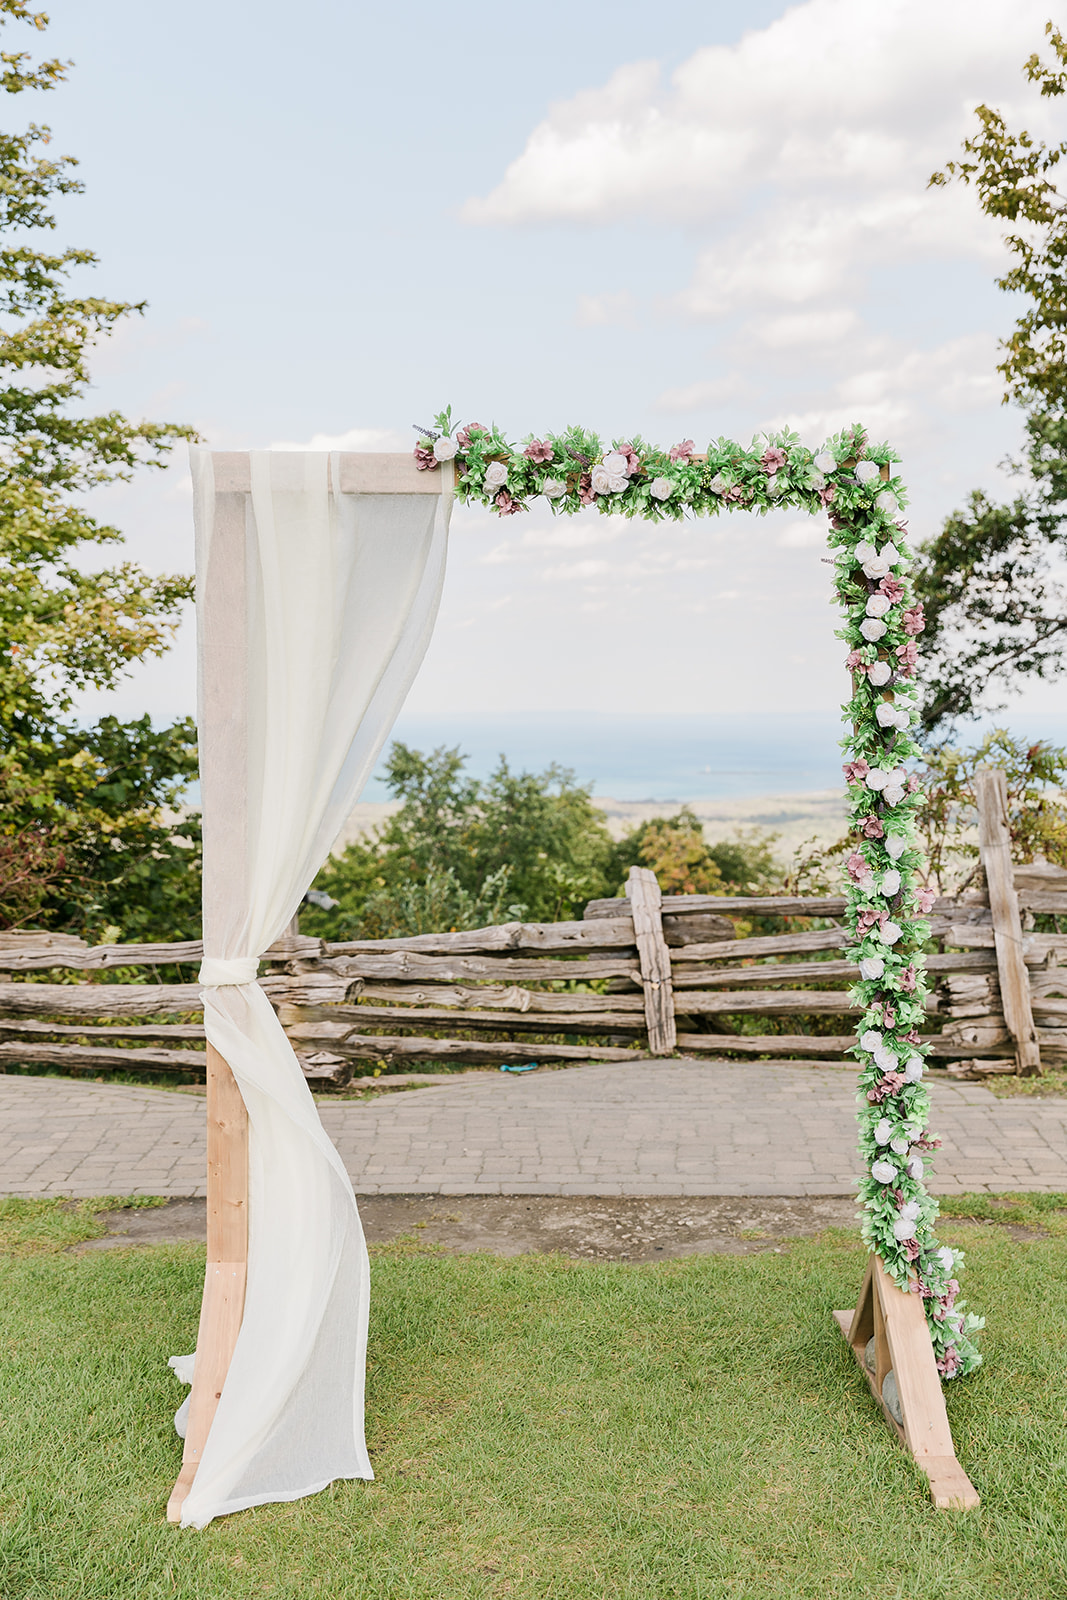 Ceremony arch with floral decor